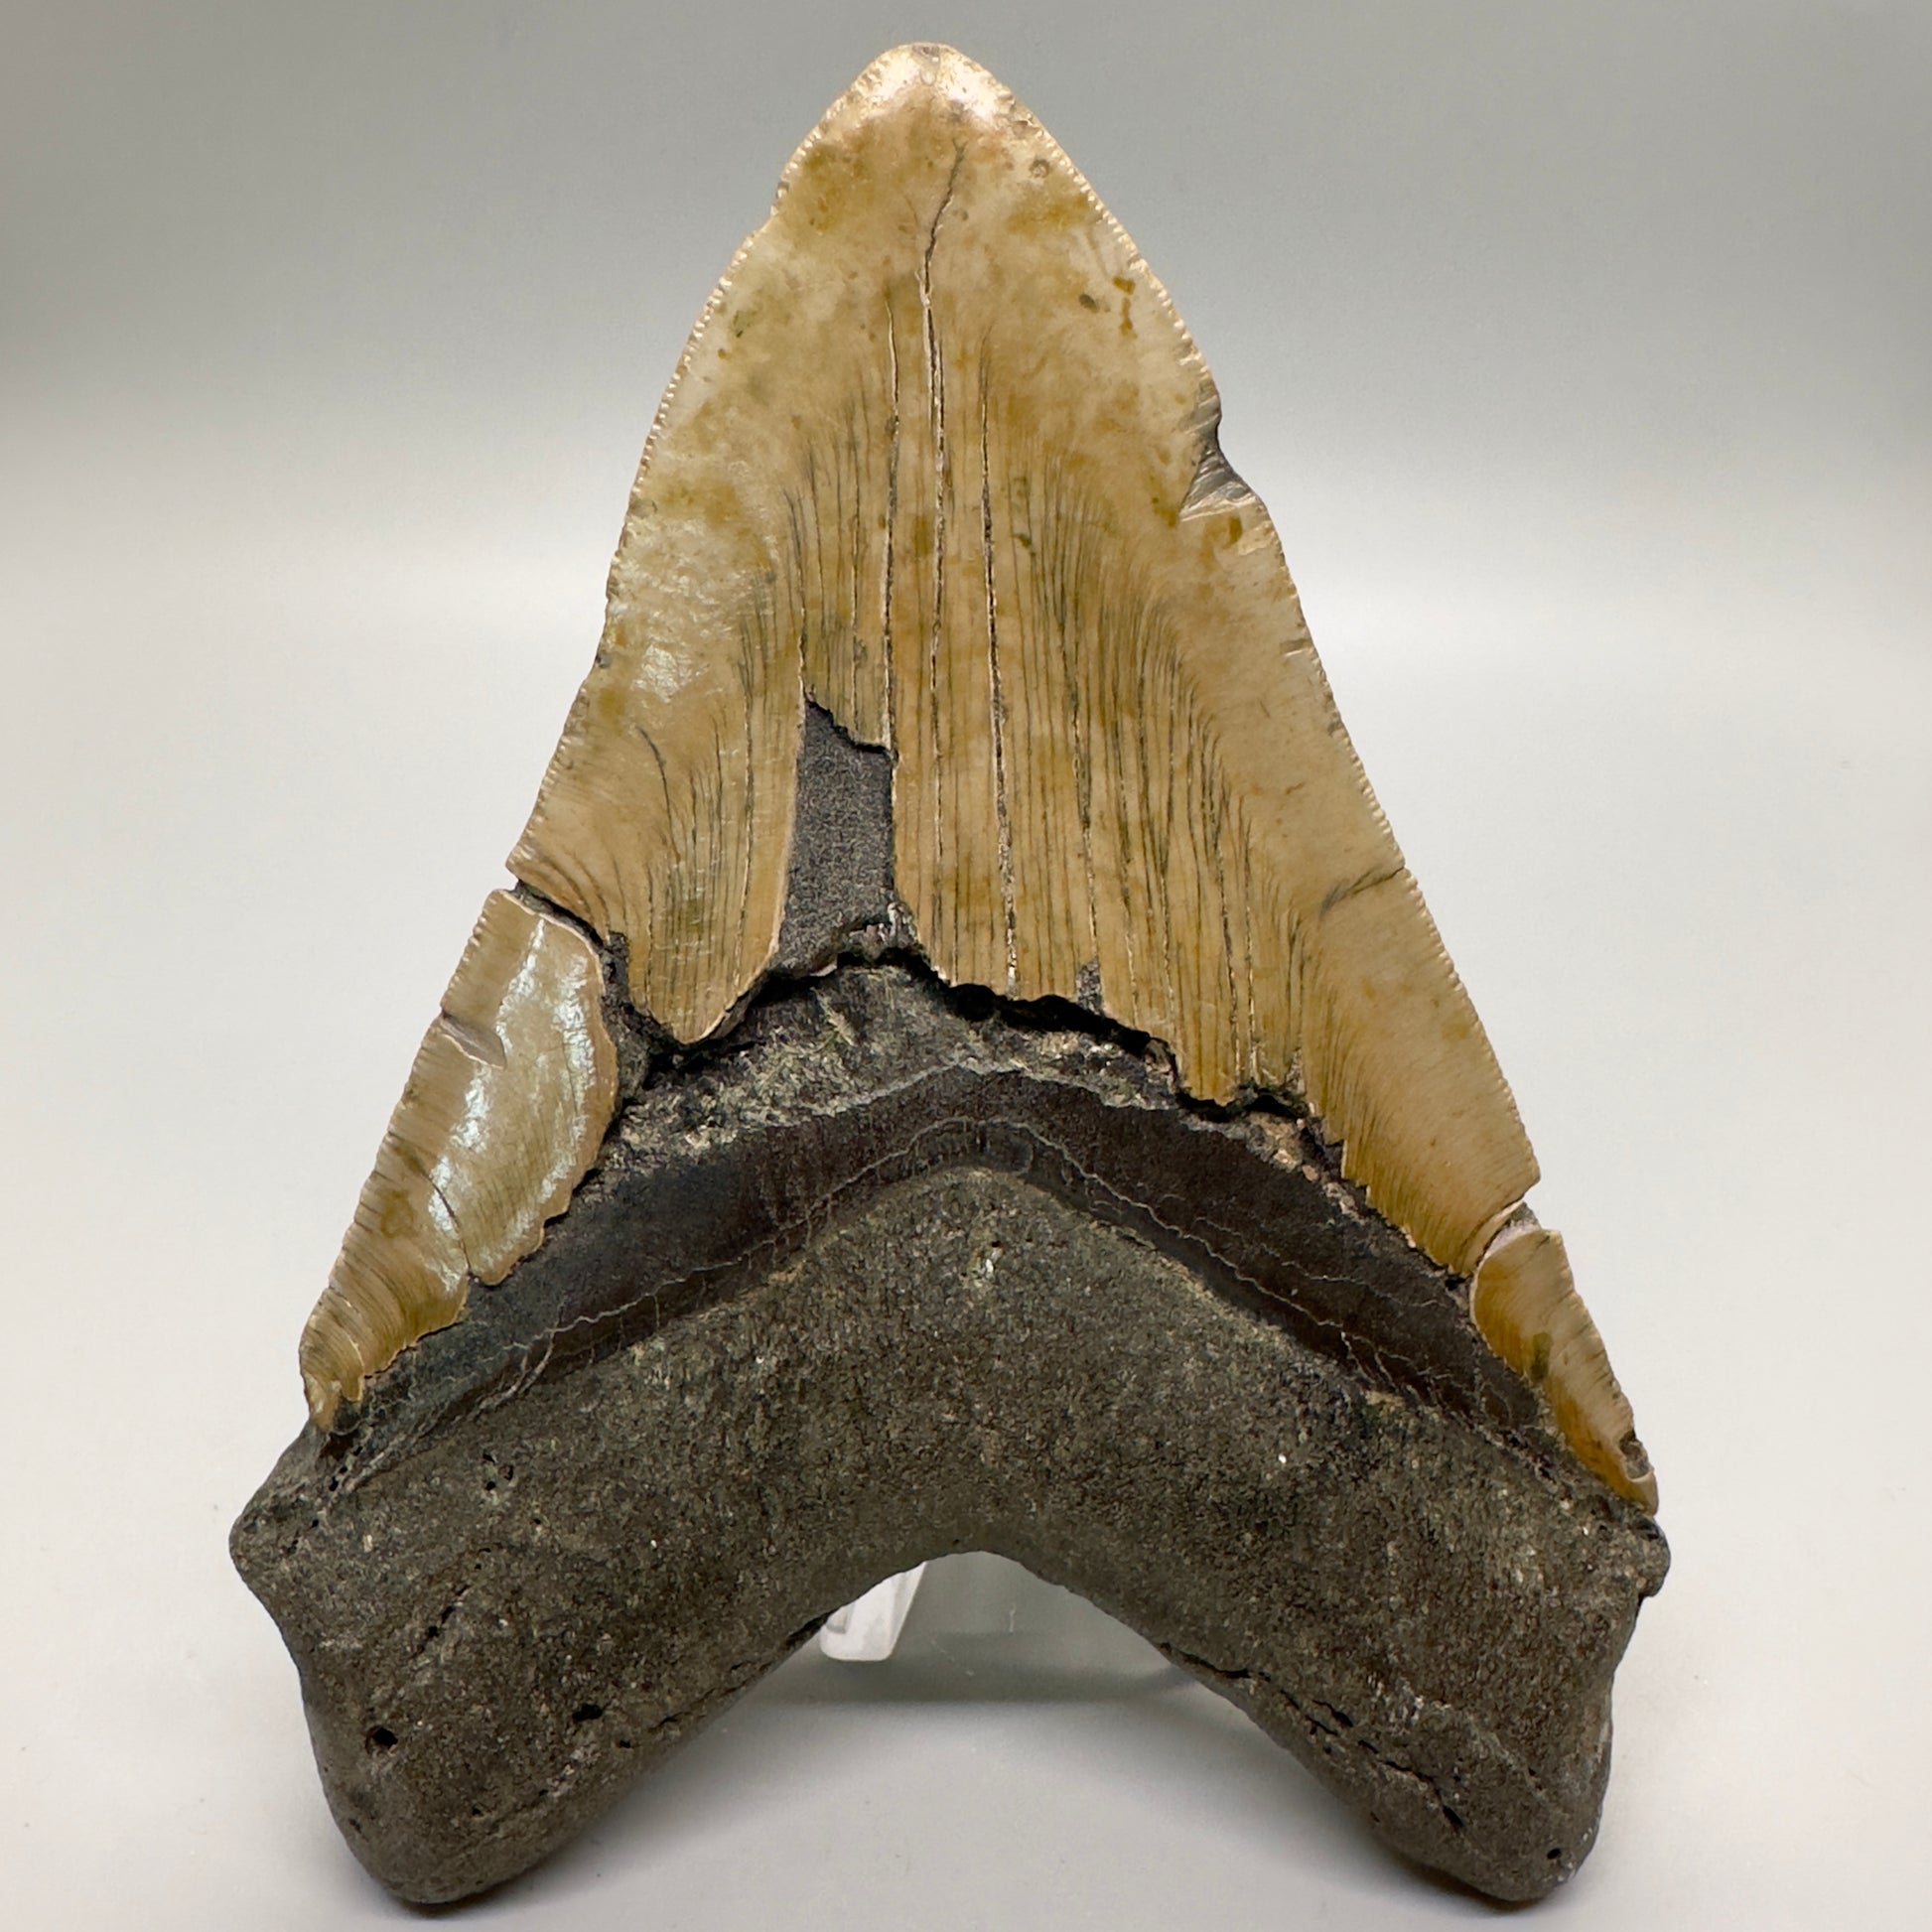 Colorful 5.61" Fossil Megalodon  Tooth - Wilmington North Carolina CM4630 - Back